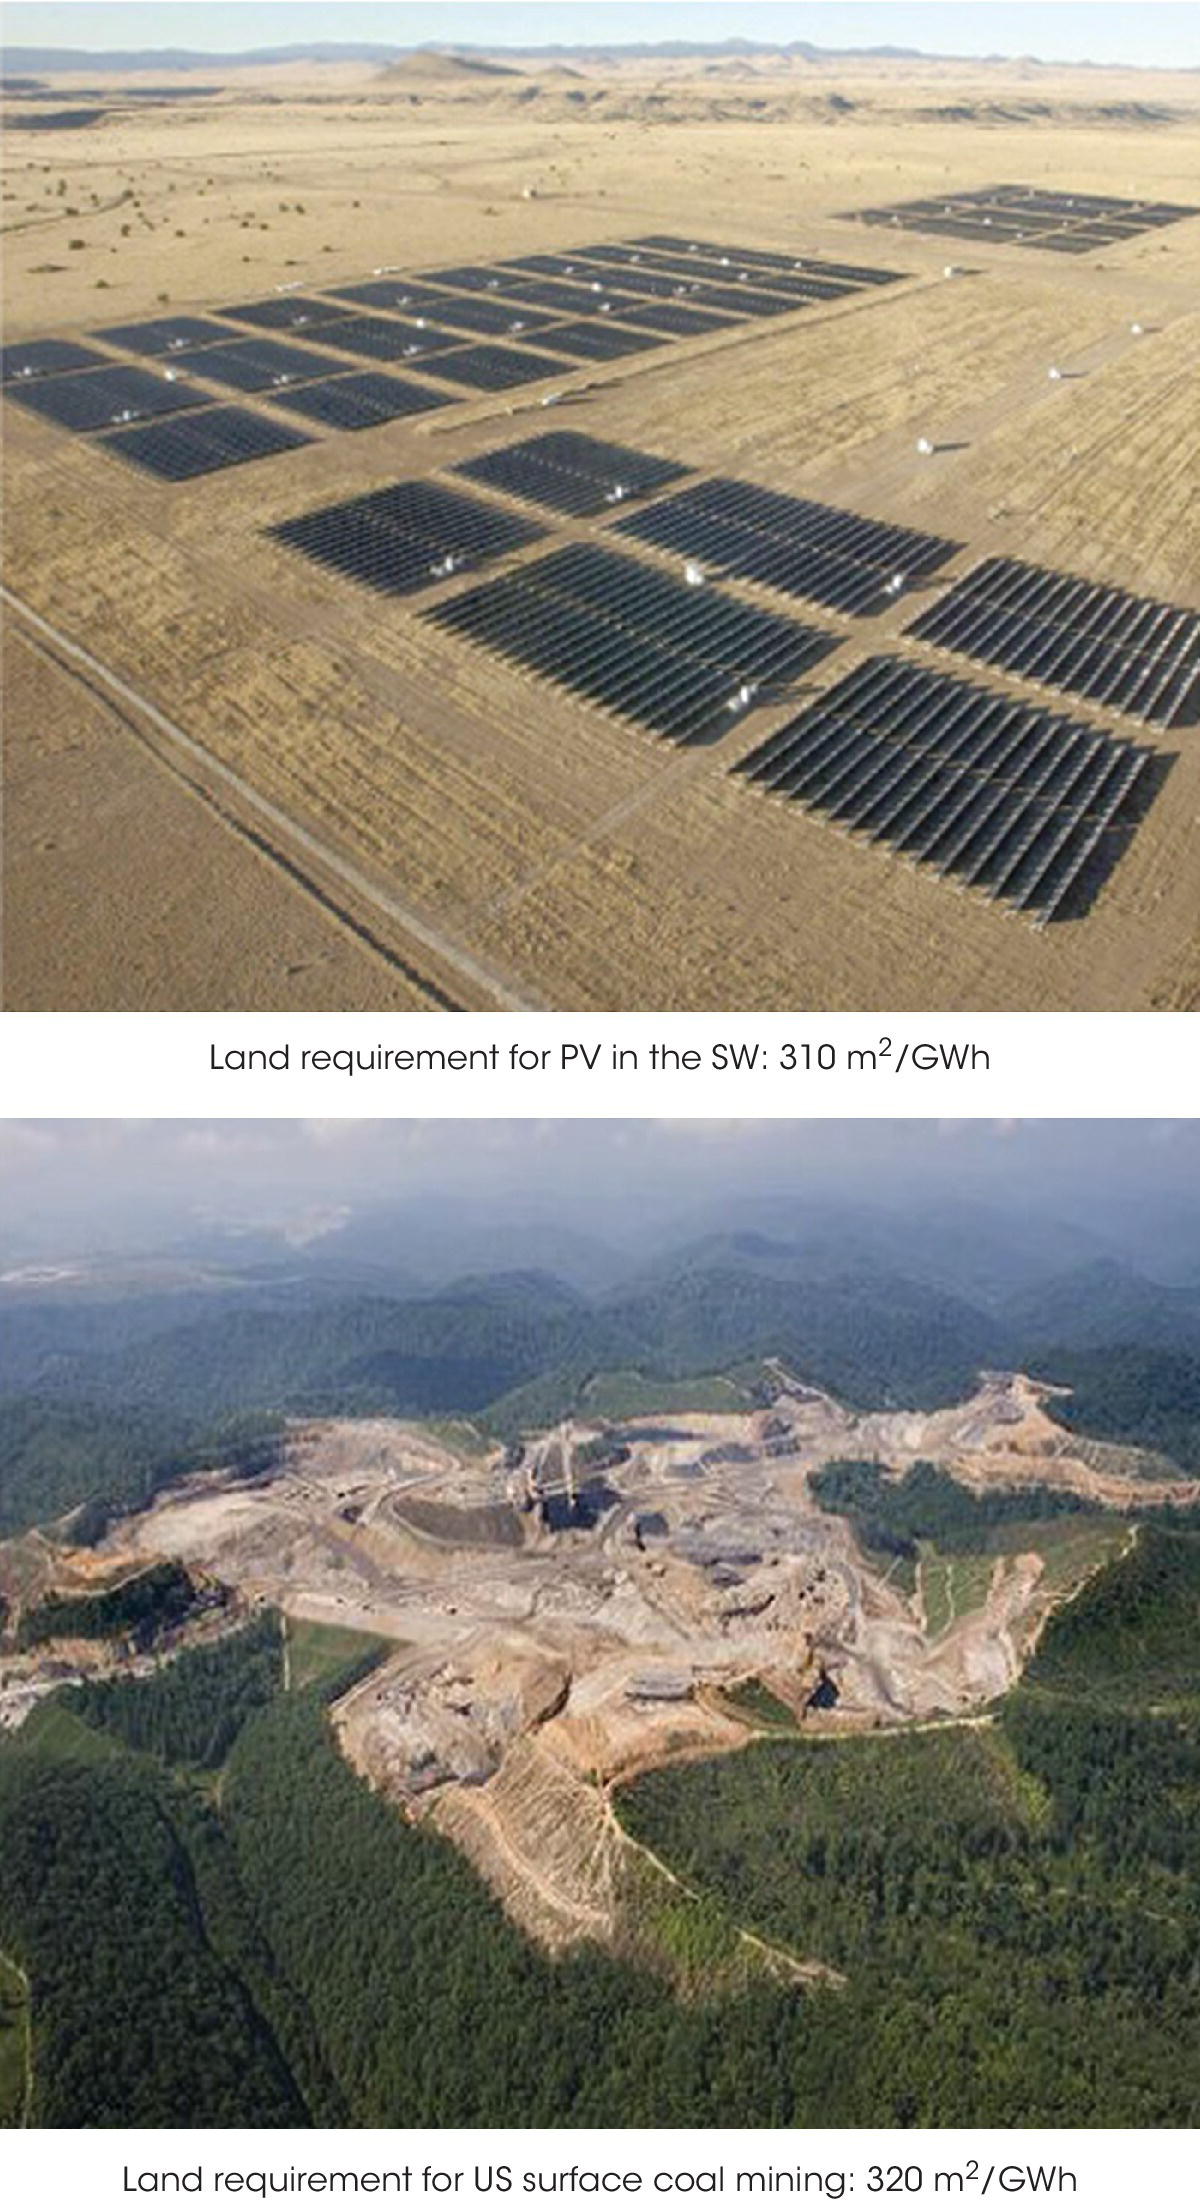 Aerial views of the PV plant in Arizona (top) and a mountain top coal mine in West Virginia (bottom).